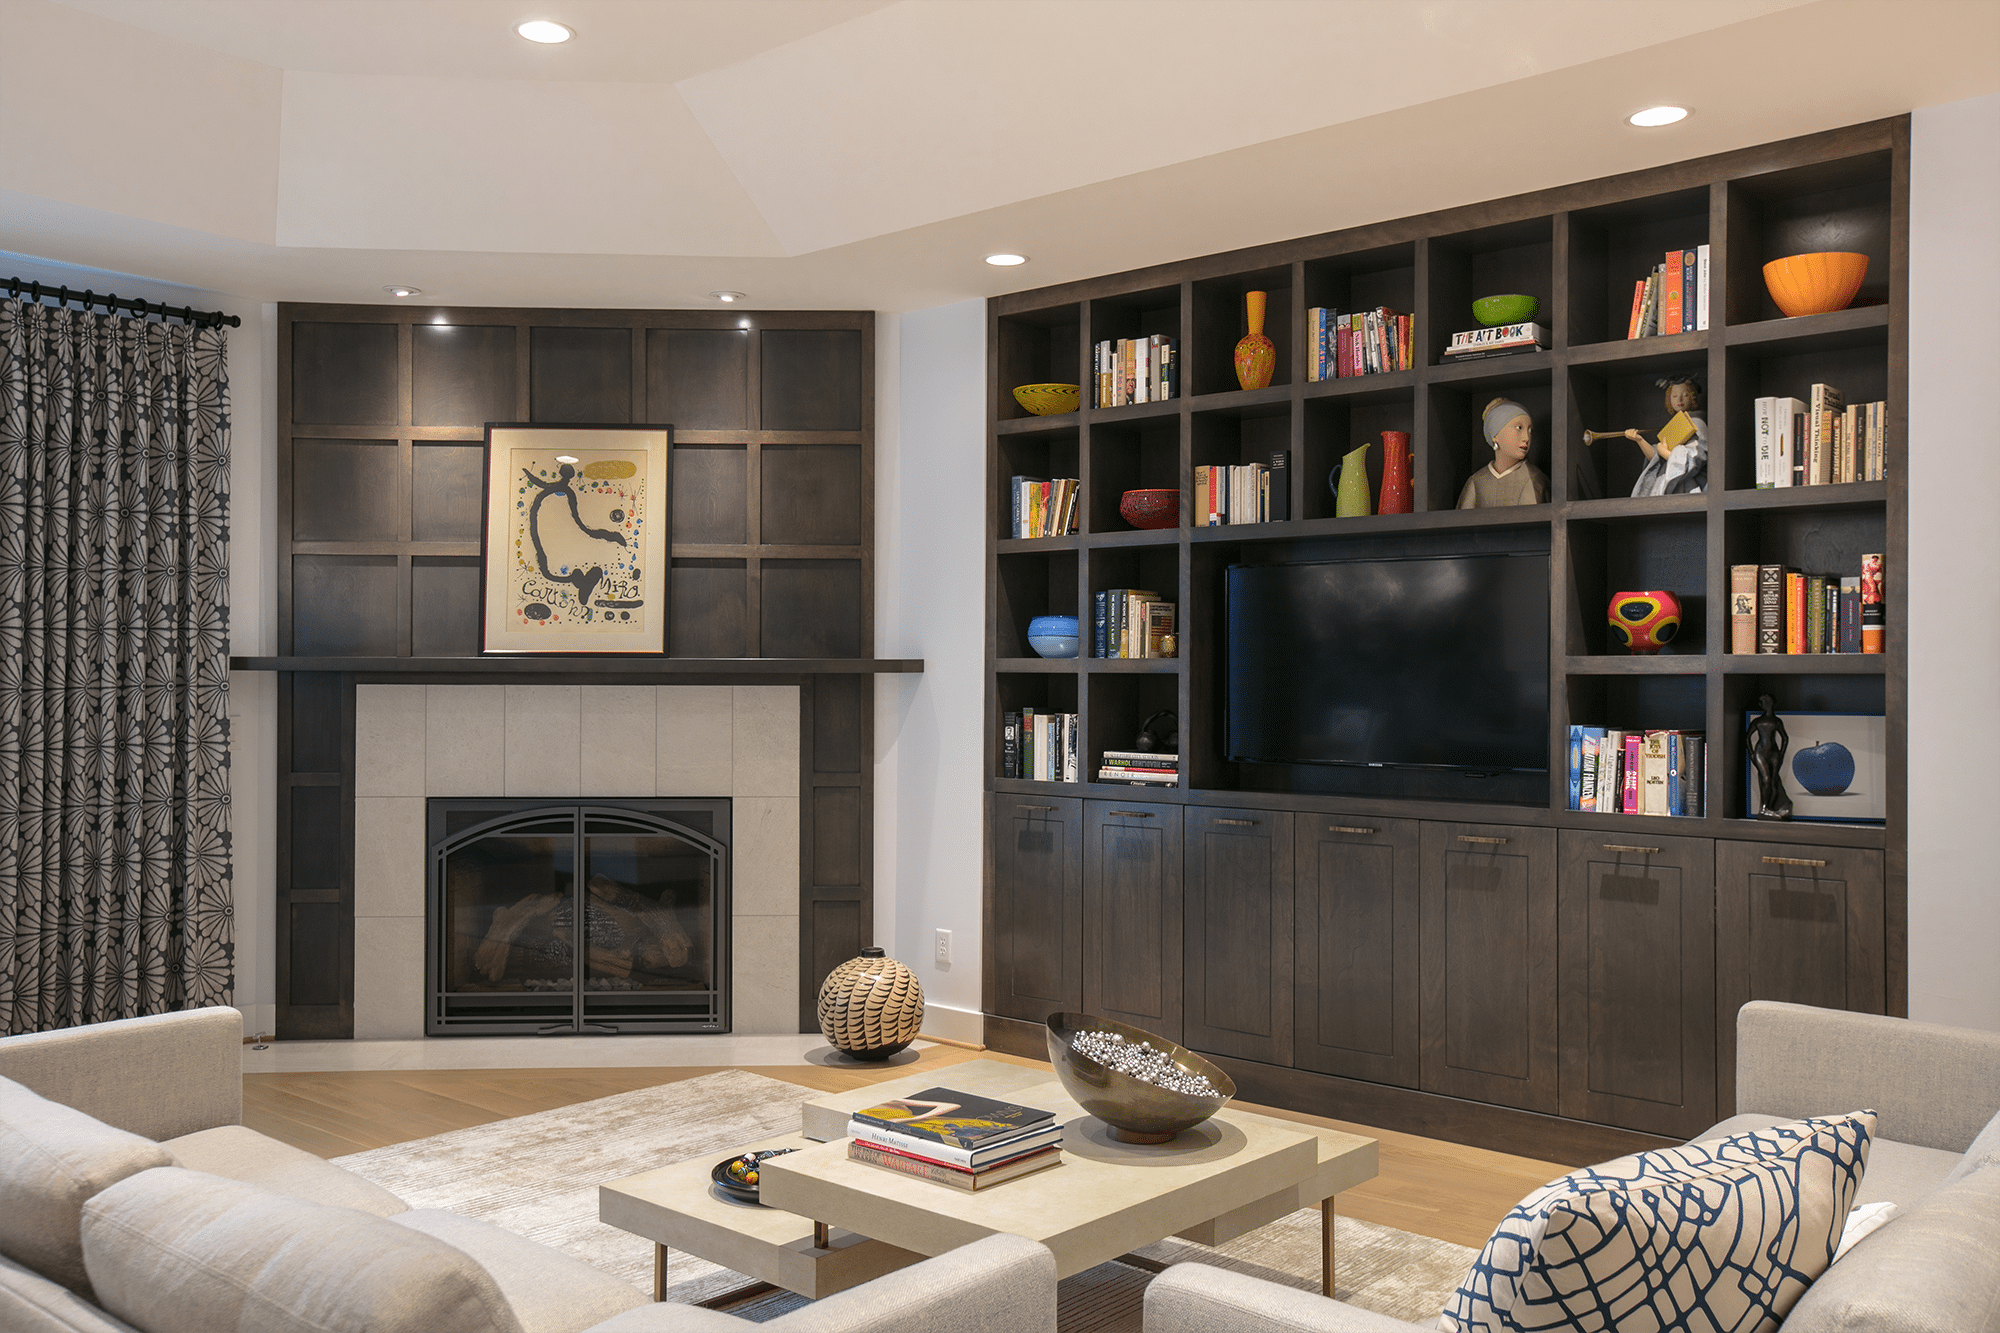 Flat screen TV on brown wooden home entertainment center